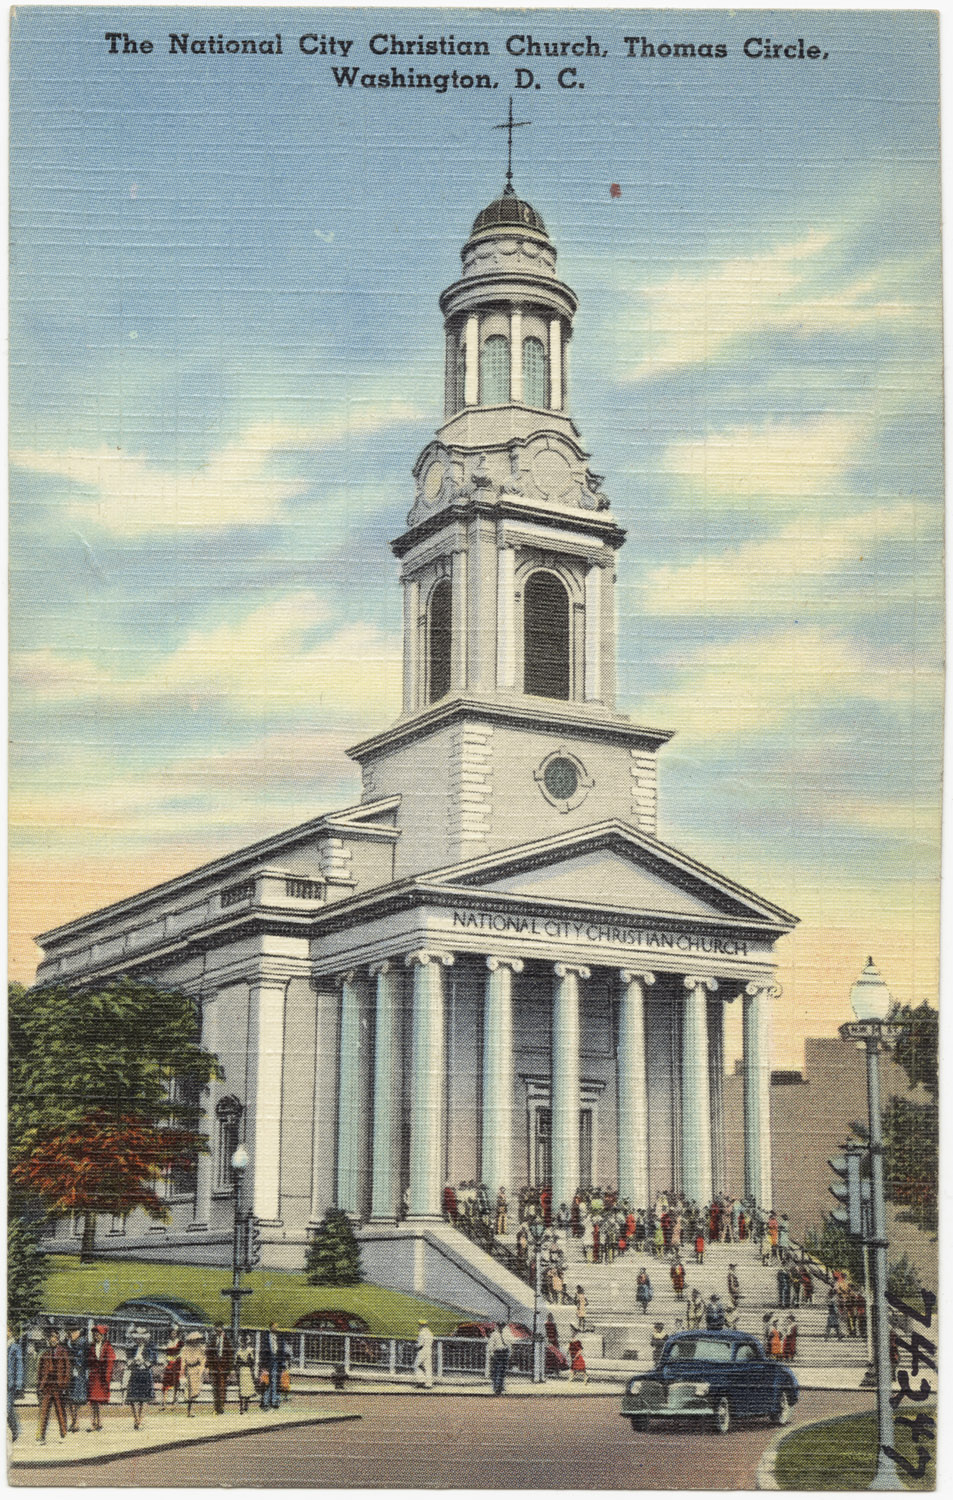 a church with a very tall steeple is pictured